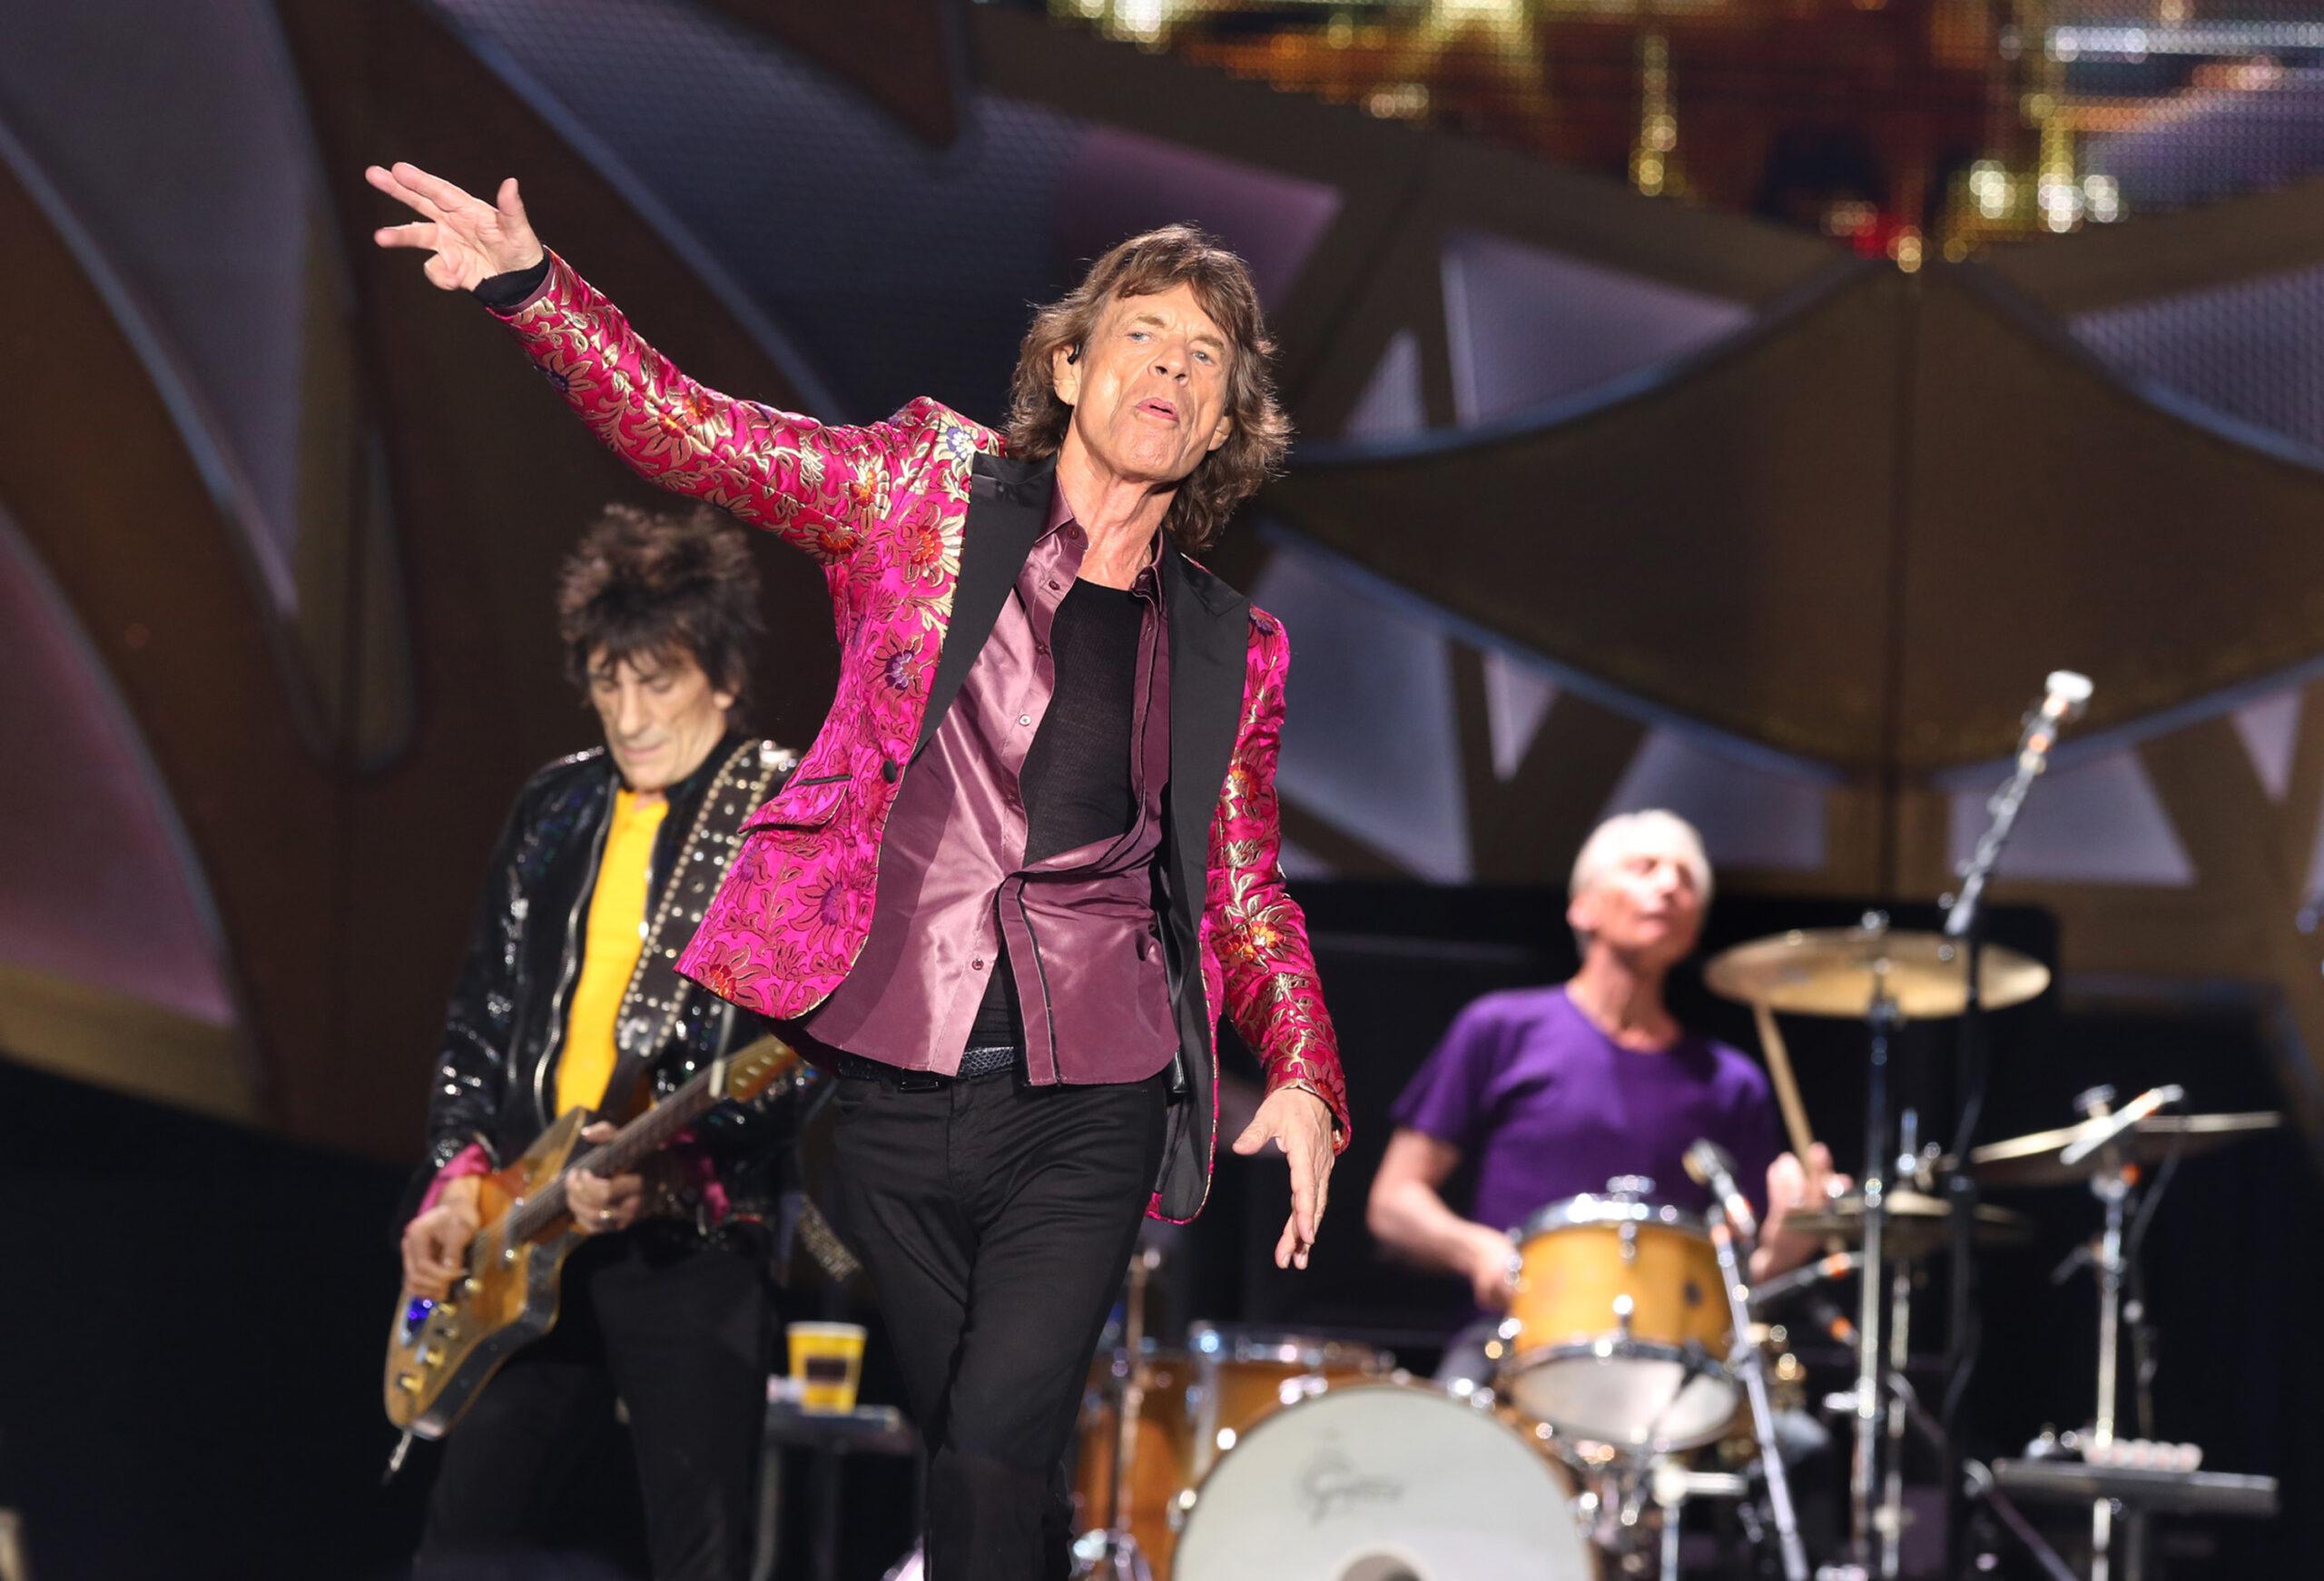 Mick Jagger with The Rolling Stones perform at the Citrus Bowl in Orlando